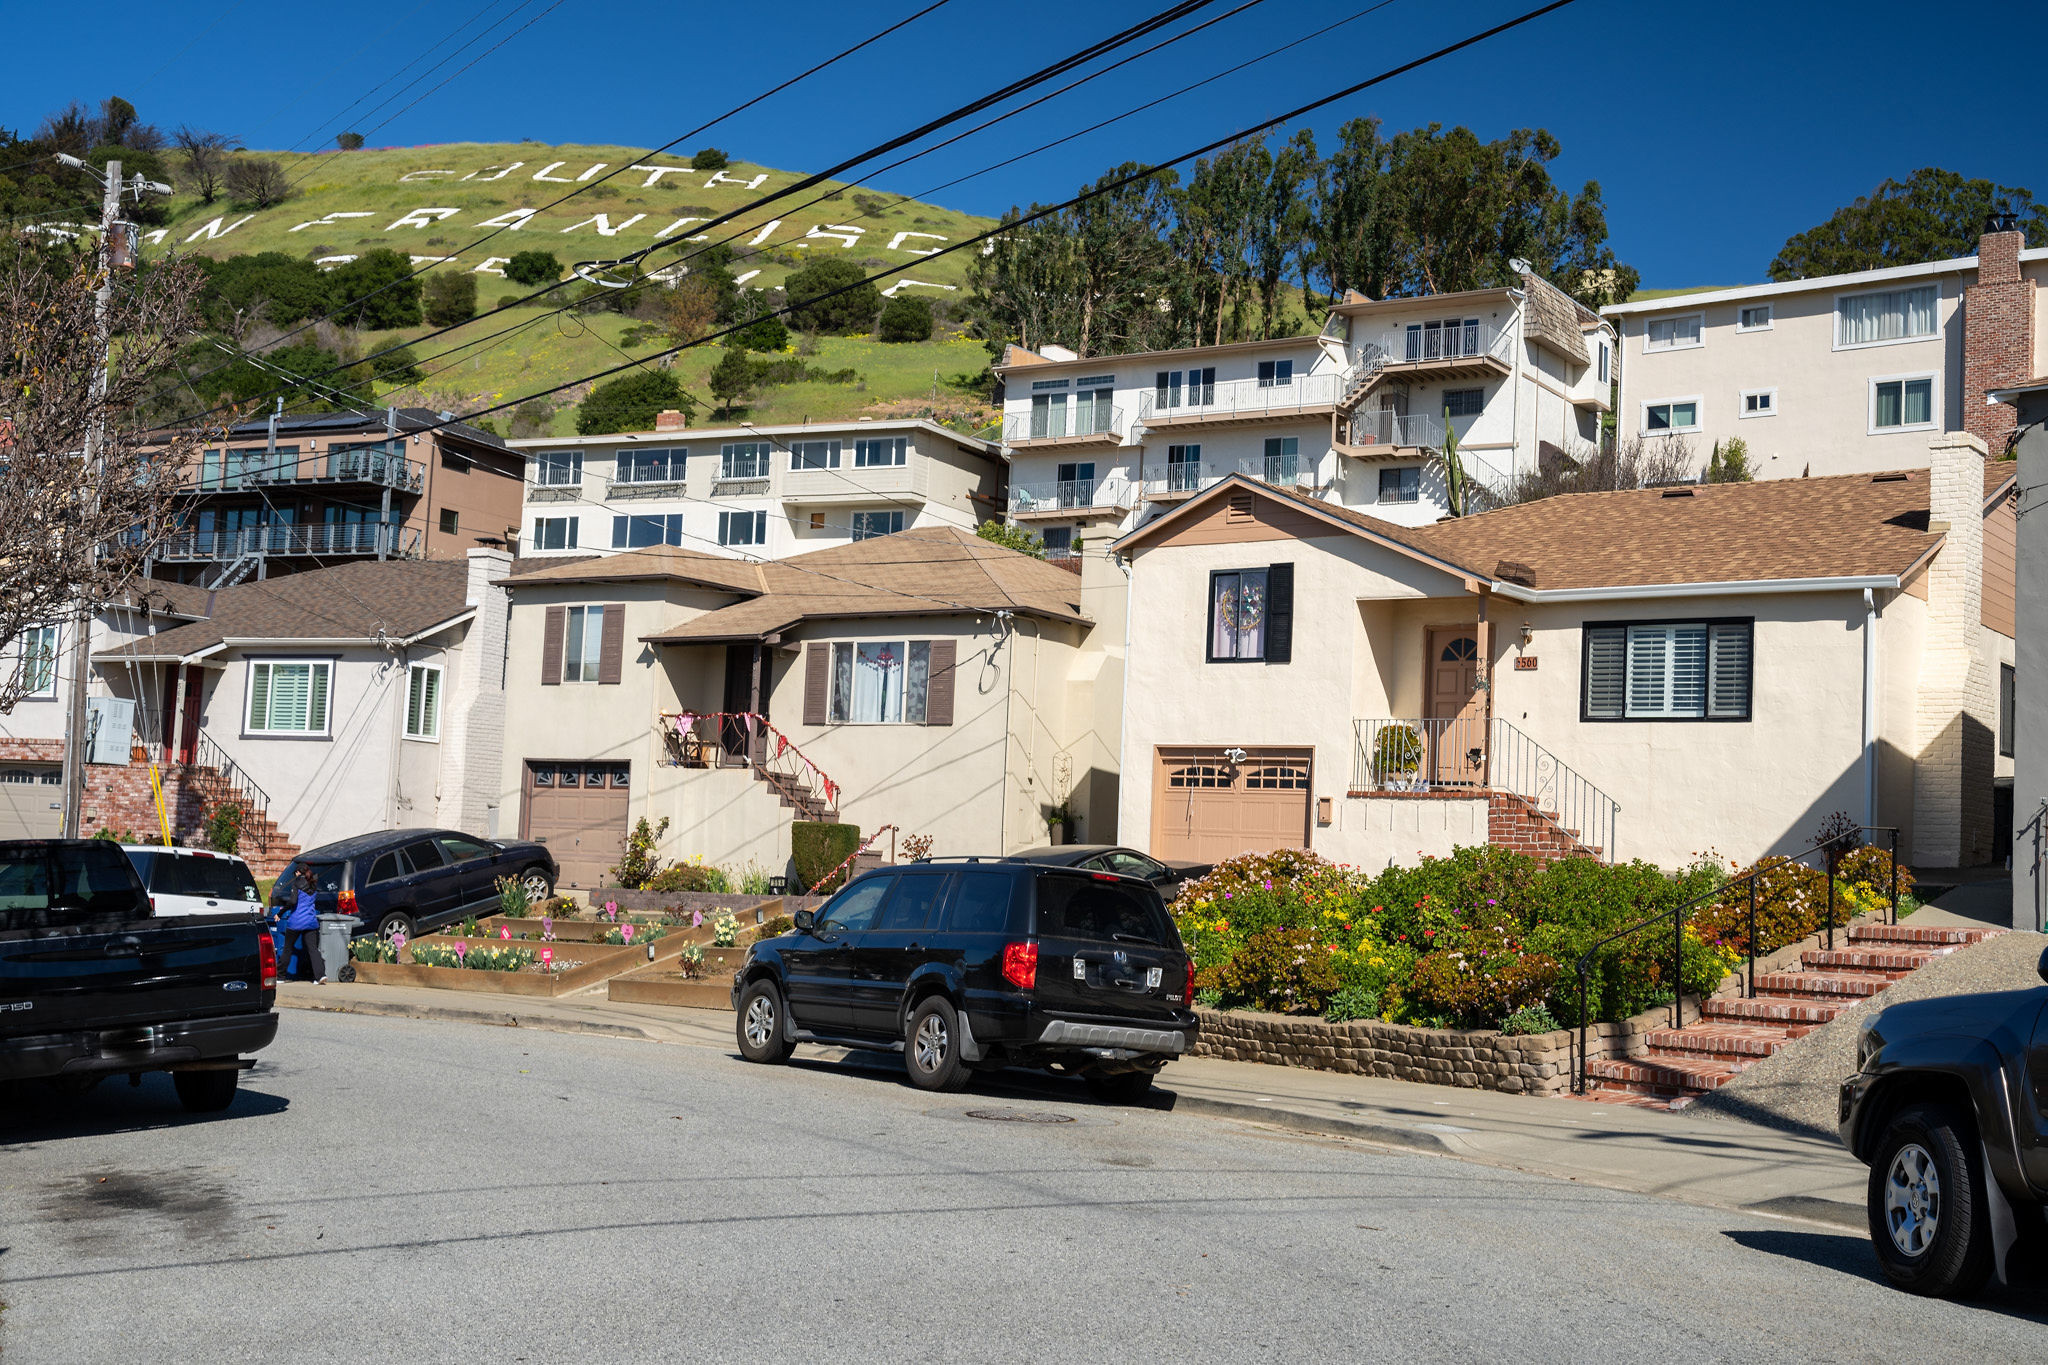 Houses at the foot  of the South San Francisco sign hill.